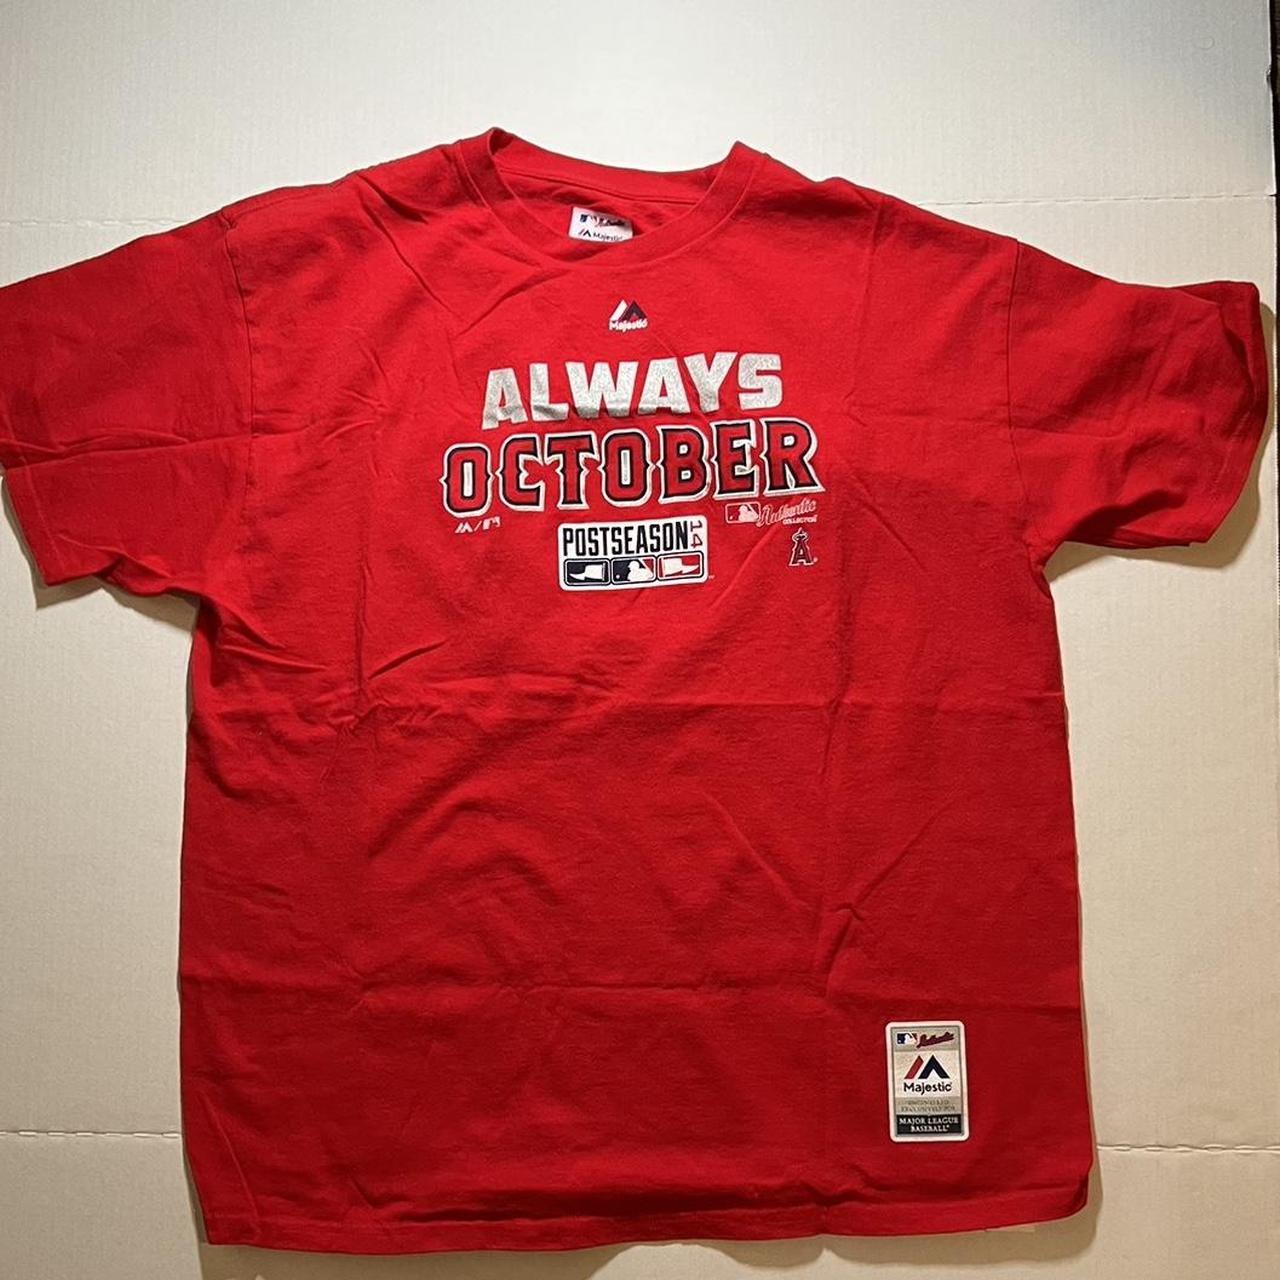 Los Angeles Angels T-Shirt Men Size XL Red Majestic Short Sleeve